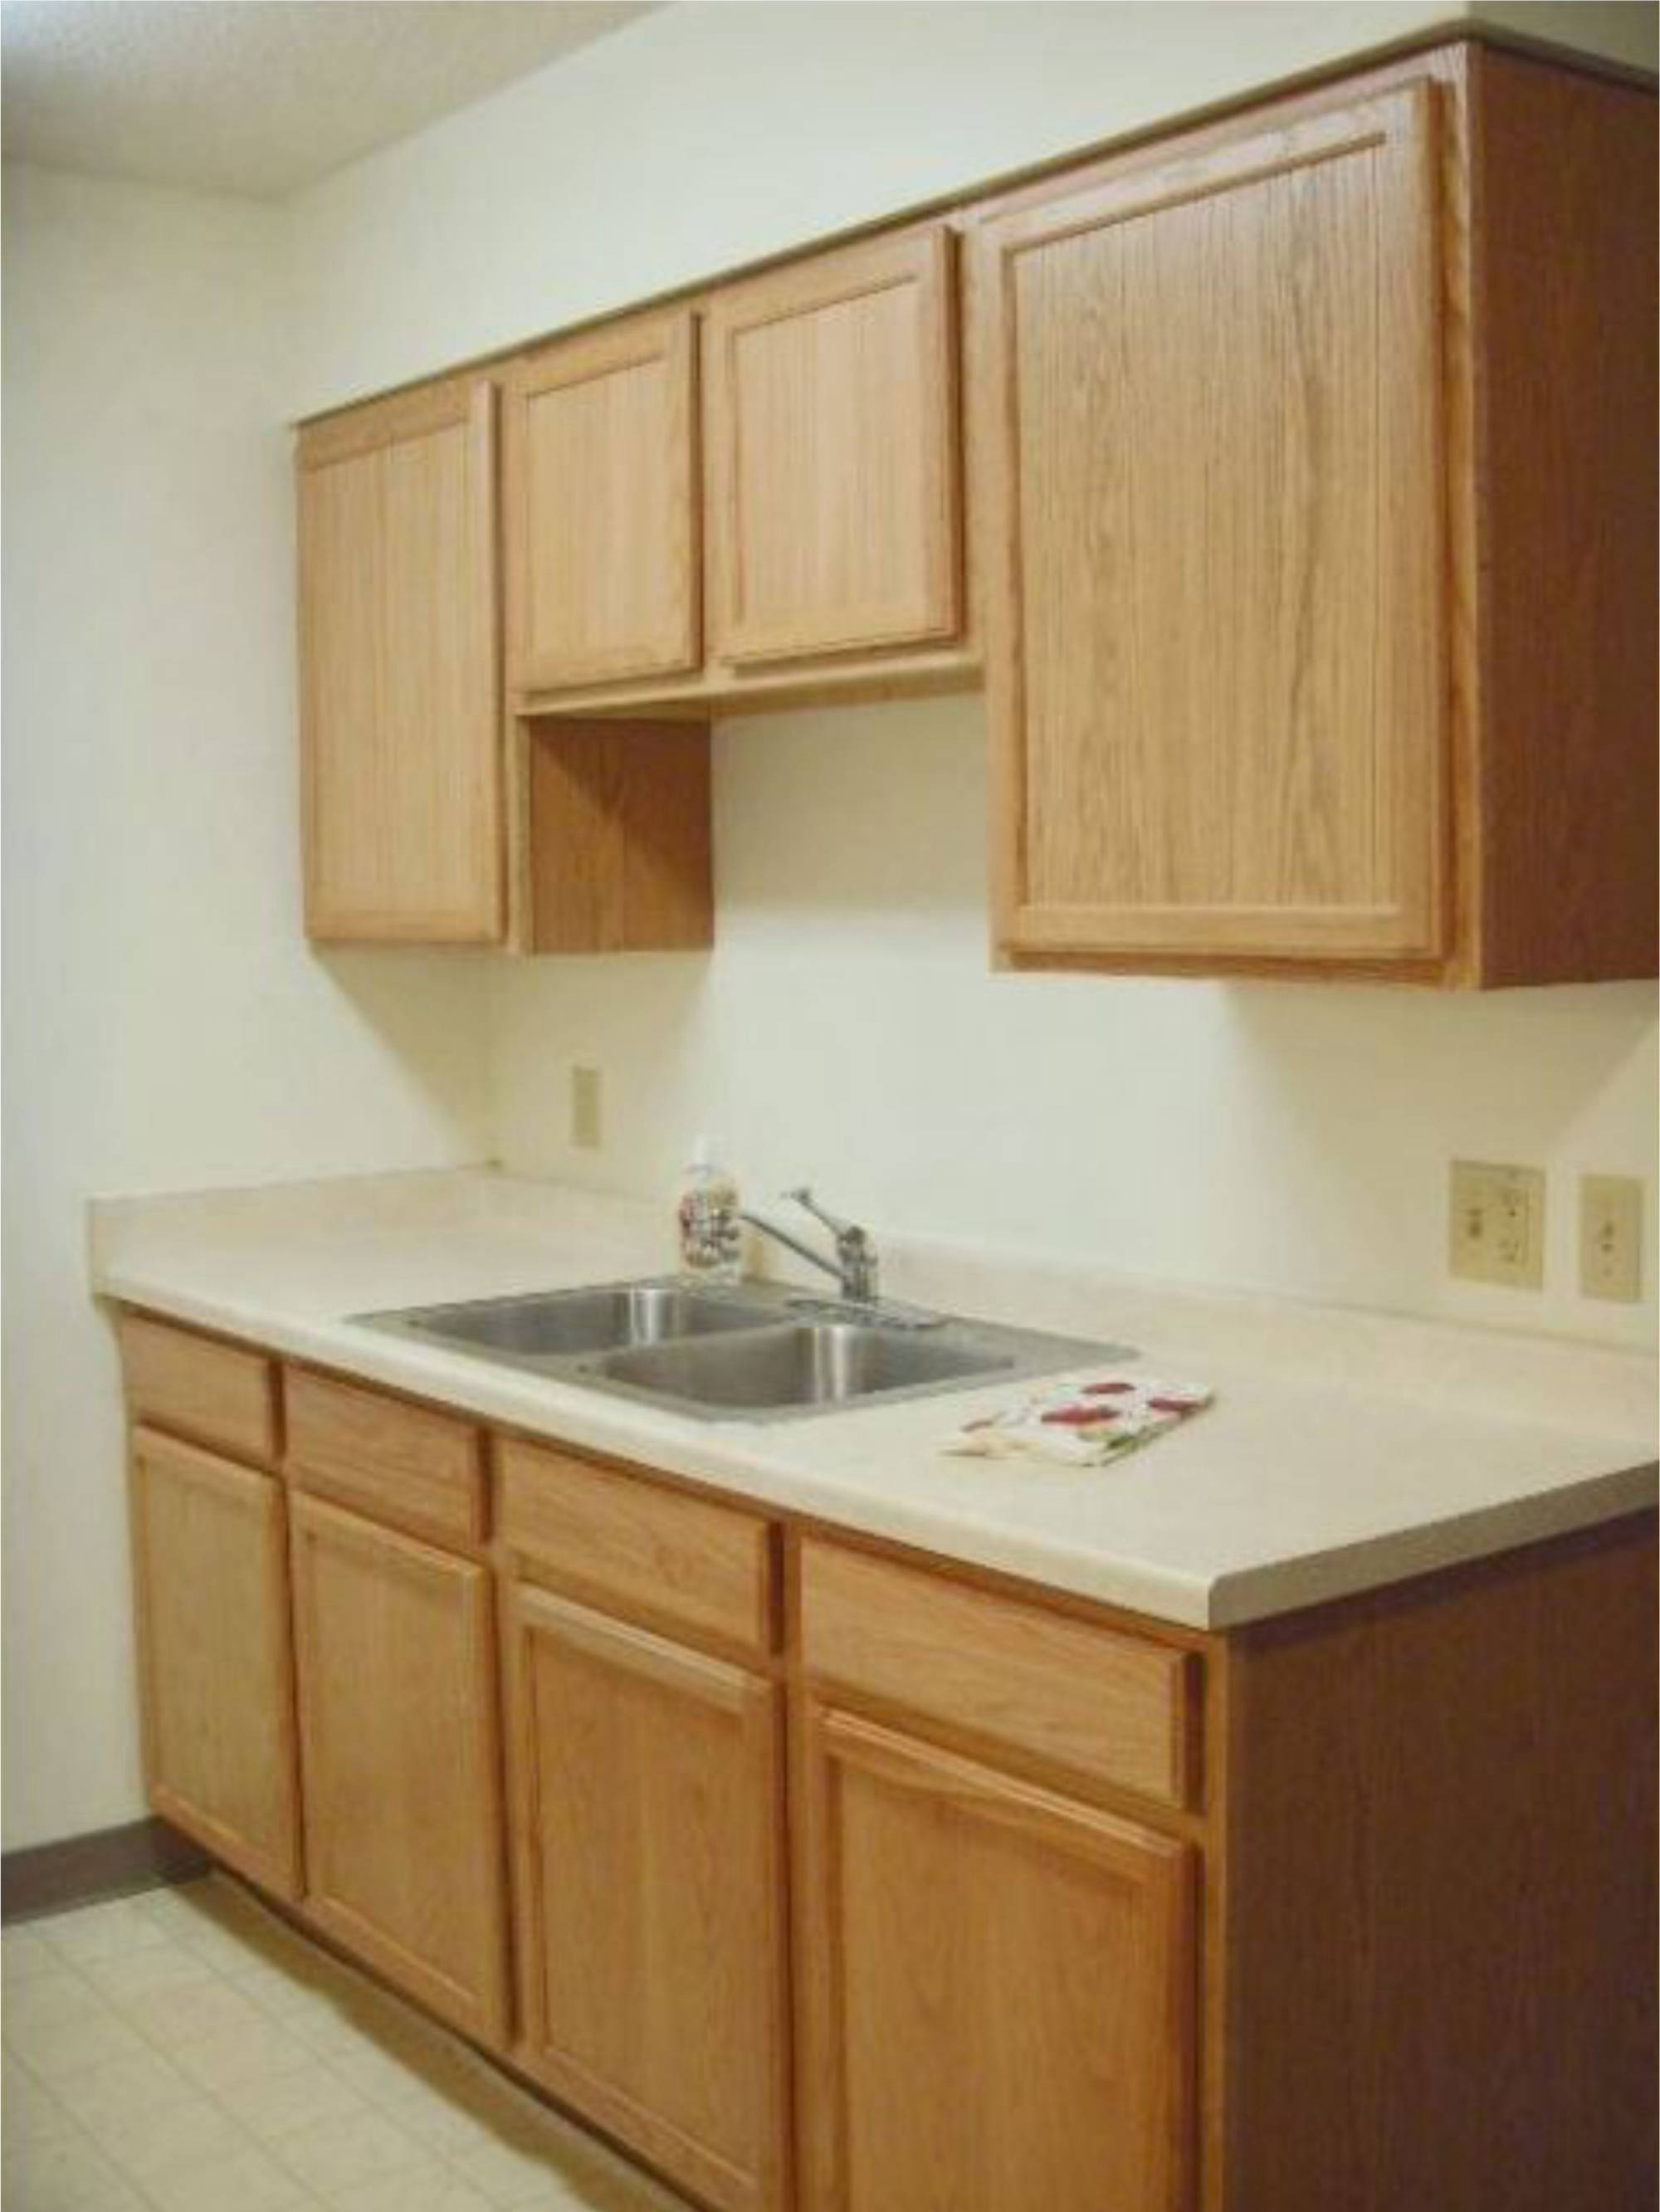 Right side of kitchen showing sink and cabinets above and below sink. Fairview Apartments St Peter, MN